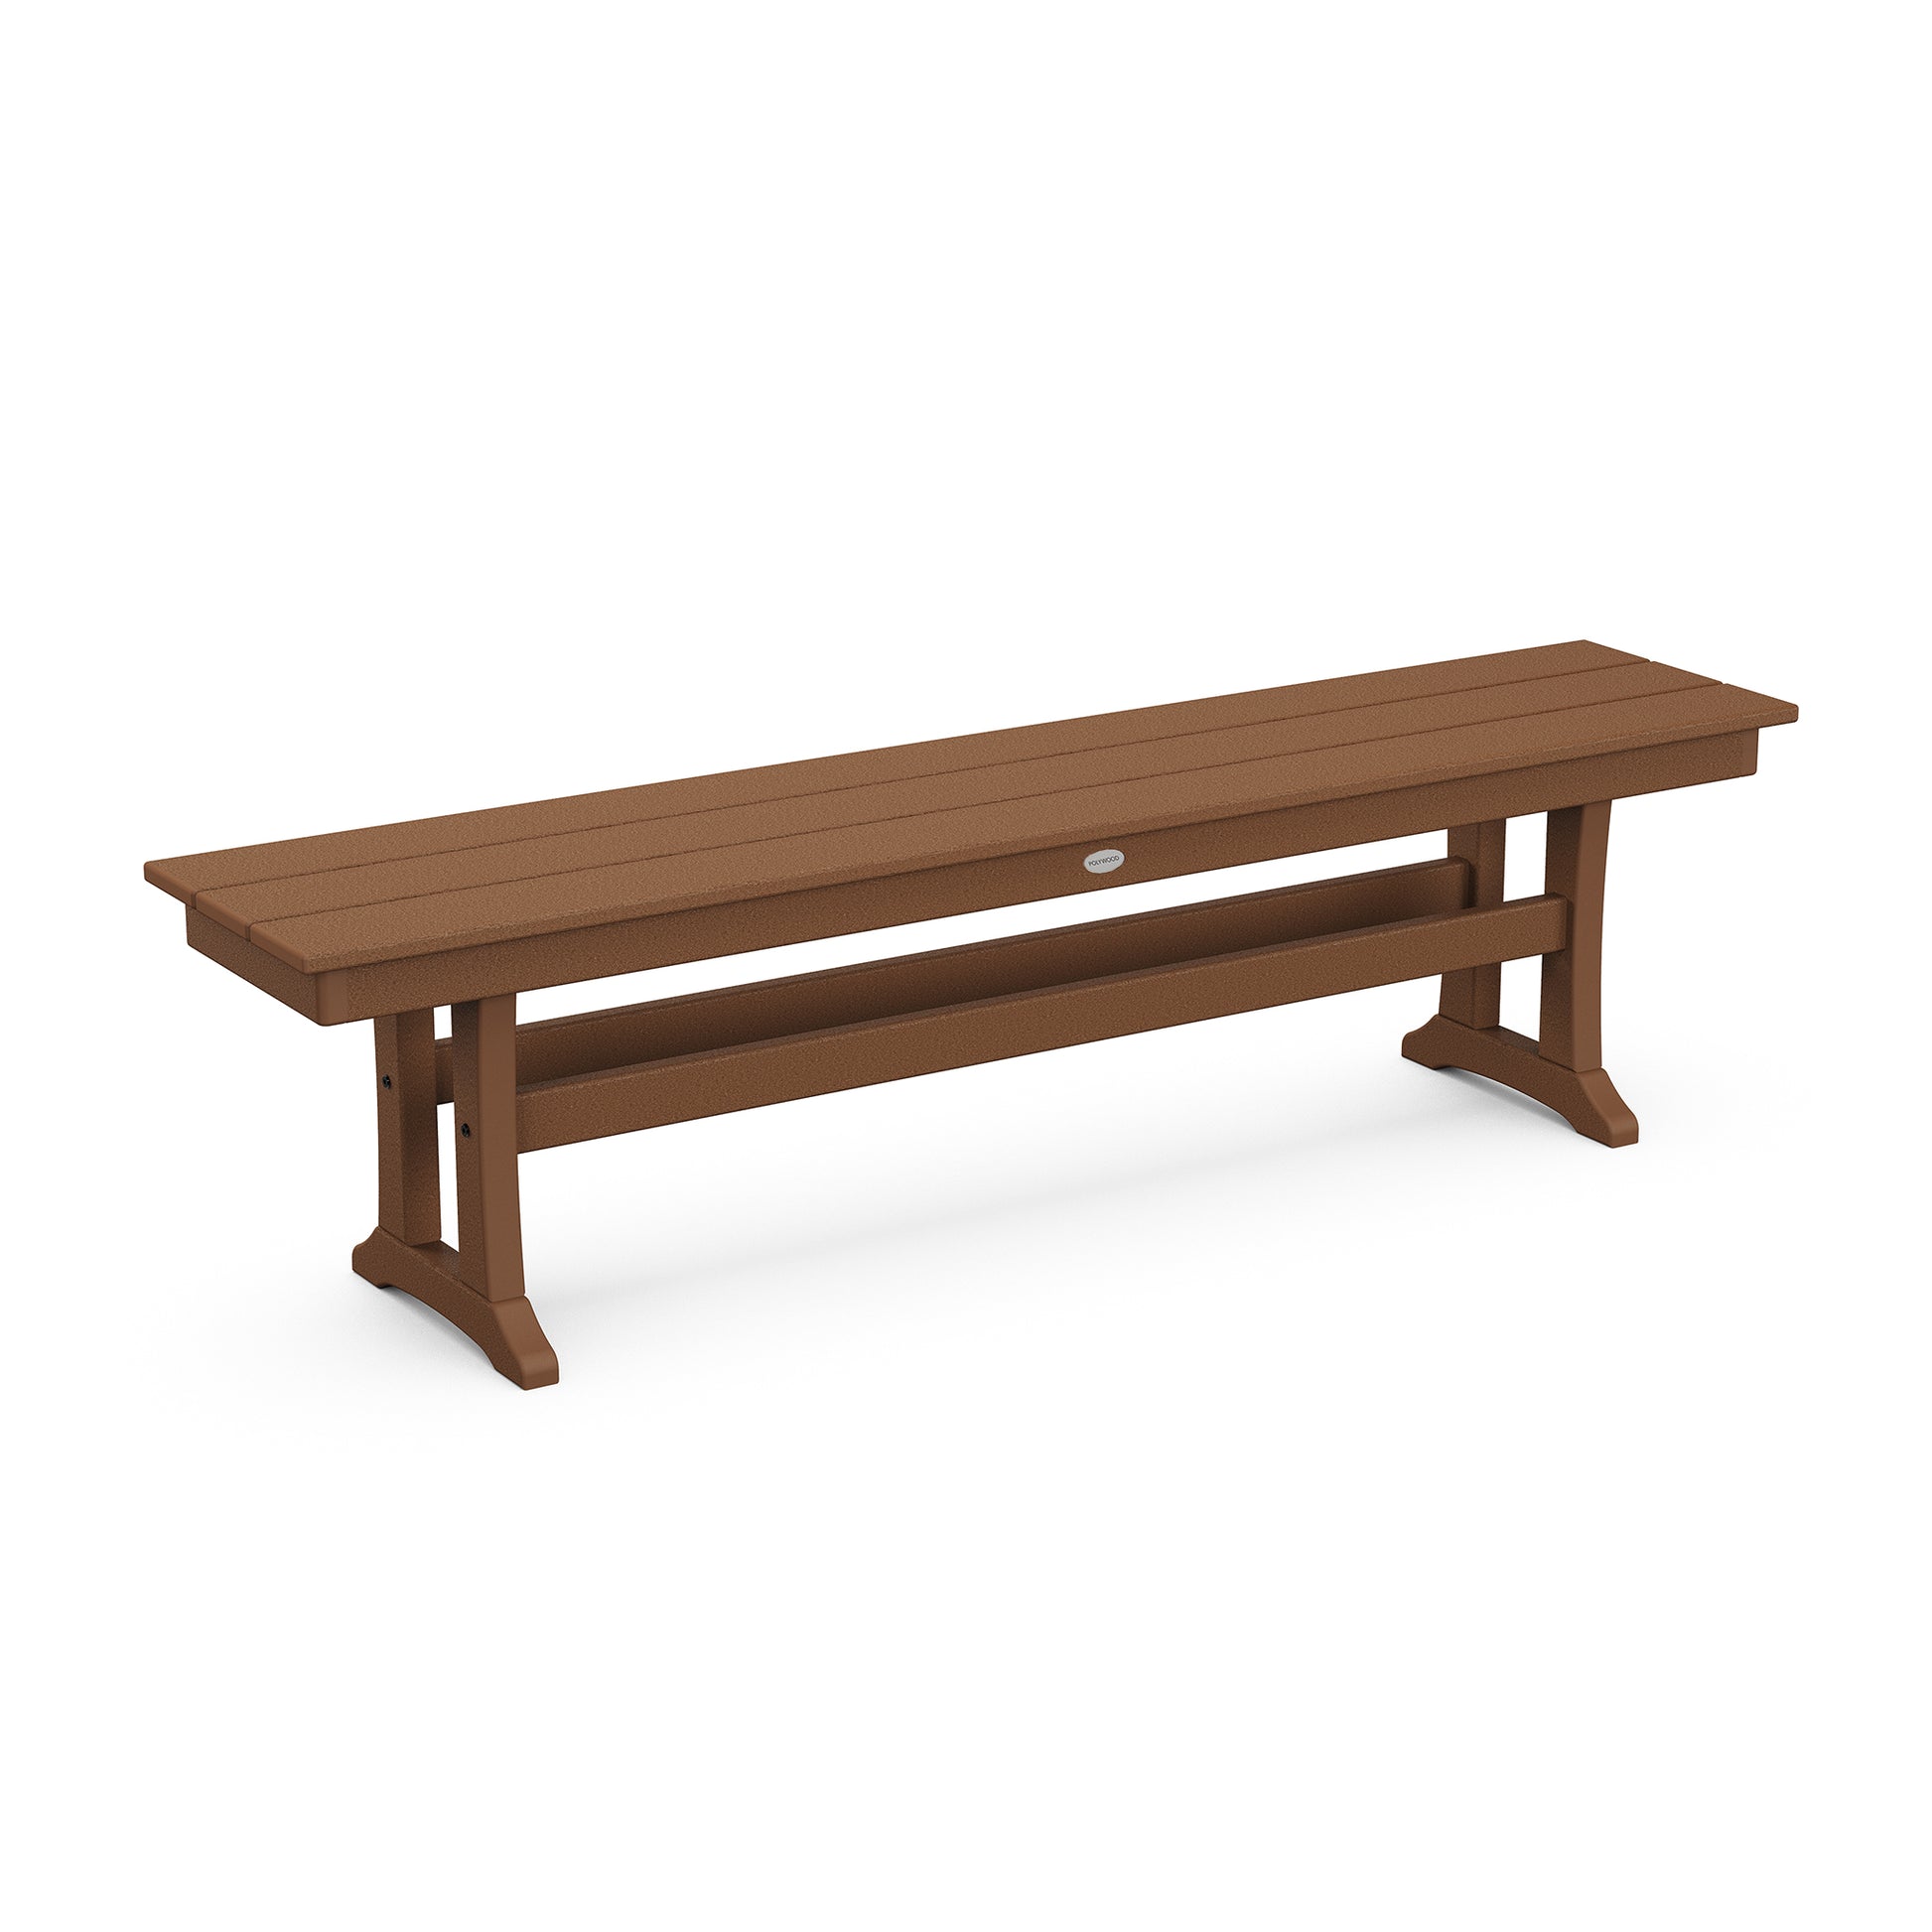 A digital rendering of a POLYWOOD Farmhouse Trestle 65" Bench featuring a simple, rectangular seat and x-shaped legs at either end, presented on a white background.